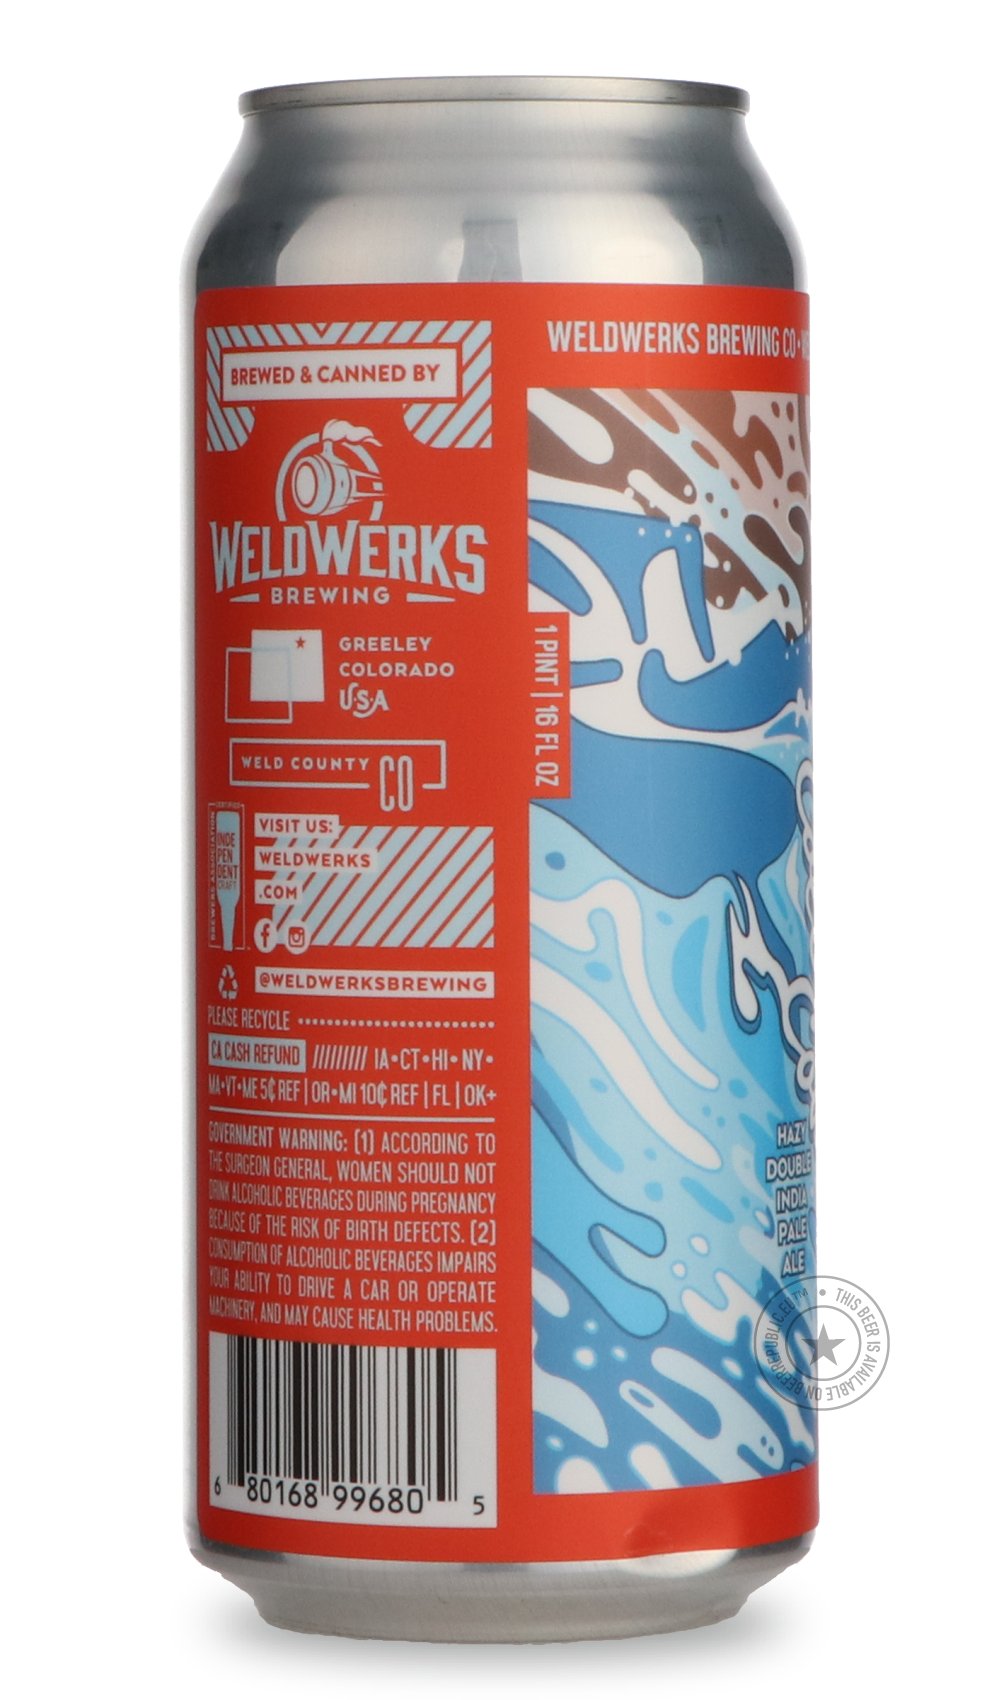 -WeldWerks- Colorado Coast-IPA- Only @ Beer Republic - The best online beer store for American & Canadian craft beer - Buy beer online from the USA and Canada - Bier online kopen - Amerikaans bier kopen - Craft beer store - Craft beer kopen - Amerikanisch bier kaufen - Bier online kaufen - Acheter biere online - IPA - Stout - Porter - New England IPA - Hazy IPA - Imperial Stout - Barrel Aged - Barrel Aged Imperial Stout - Brown - Dark beer - Blond - Blonde - Pilsner - Lager - Wheat - Weizen - Amber - Barley